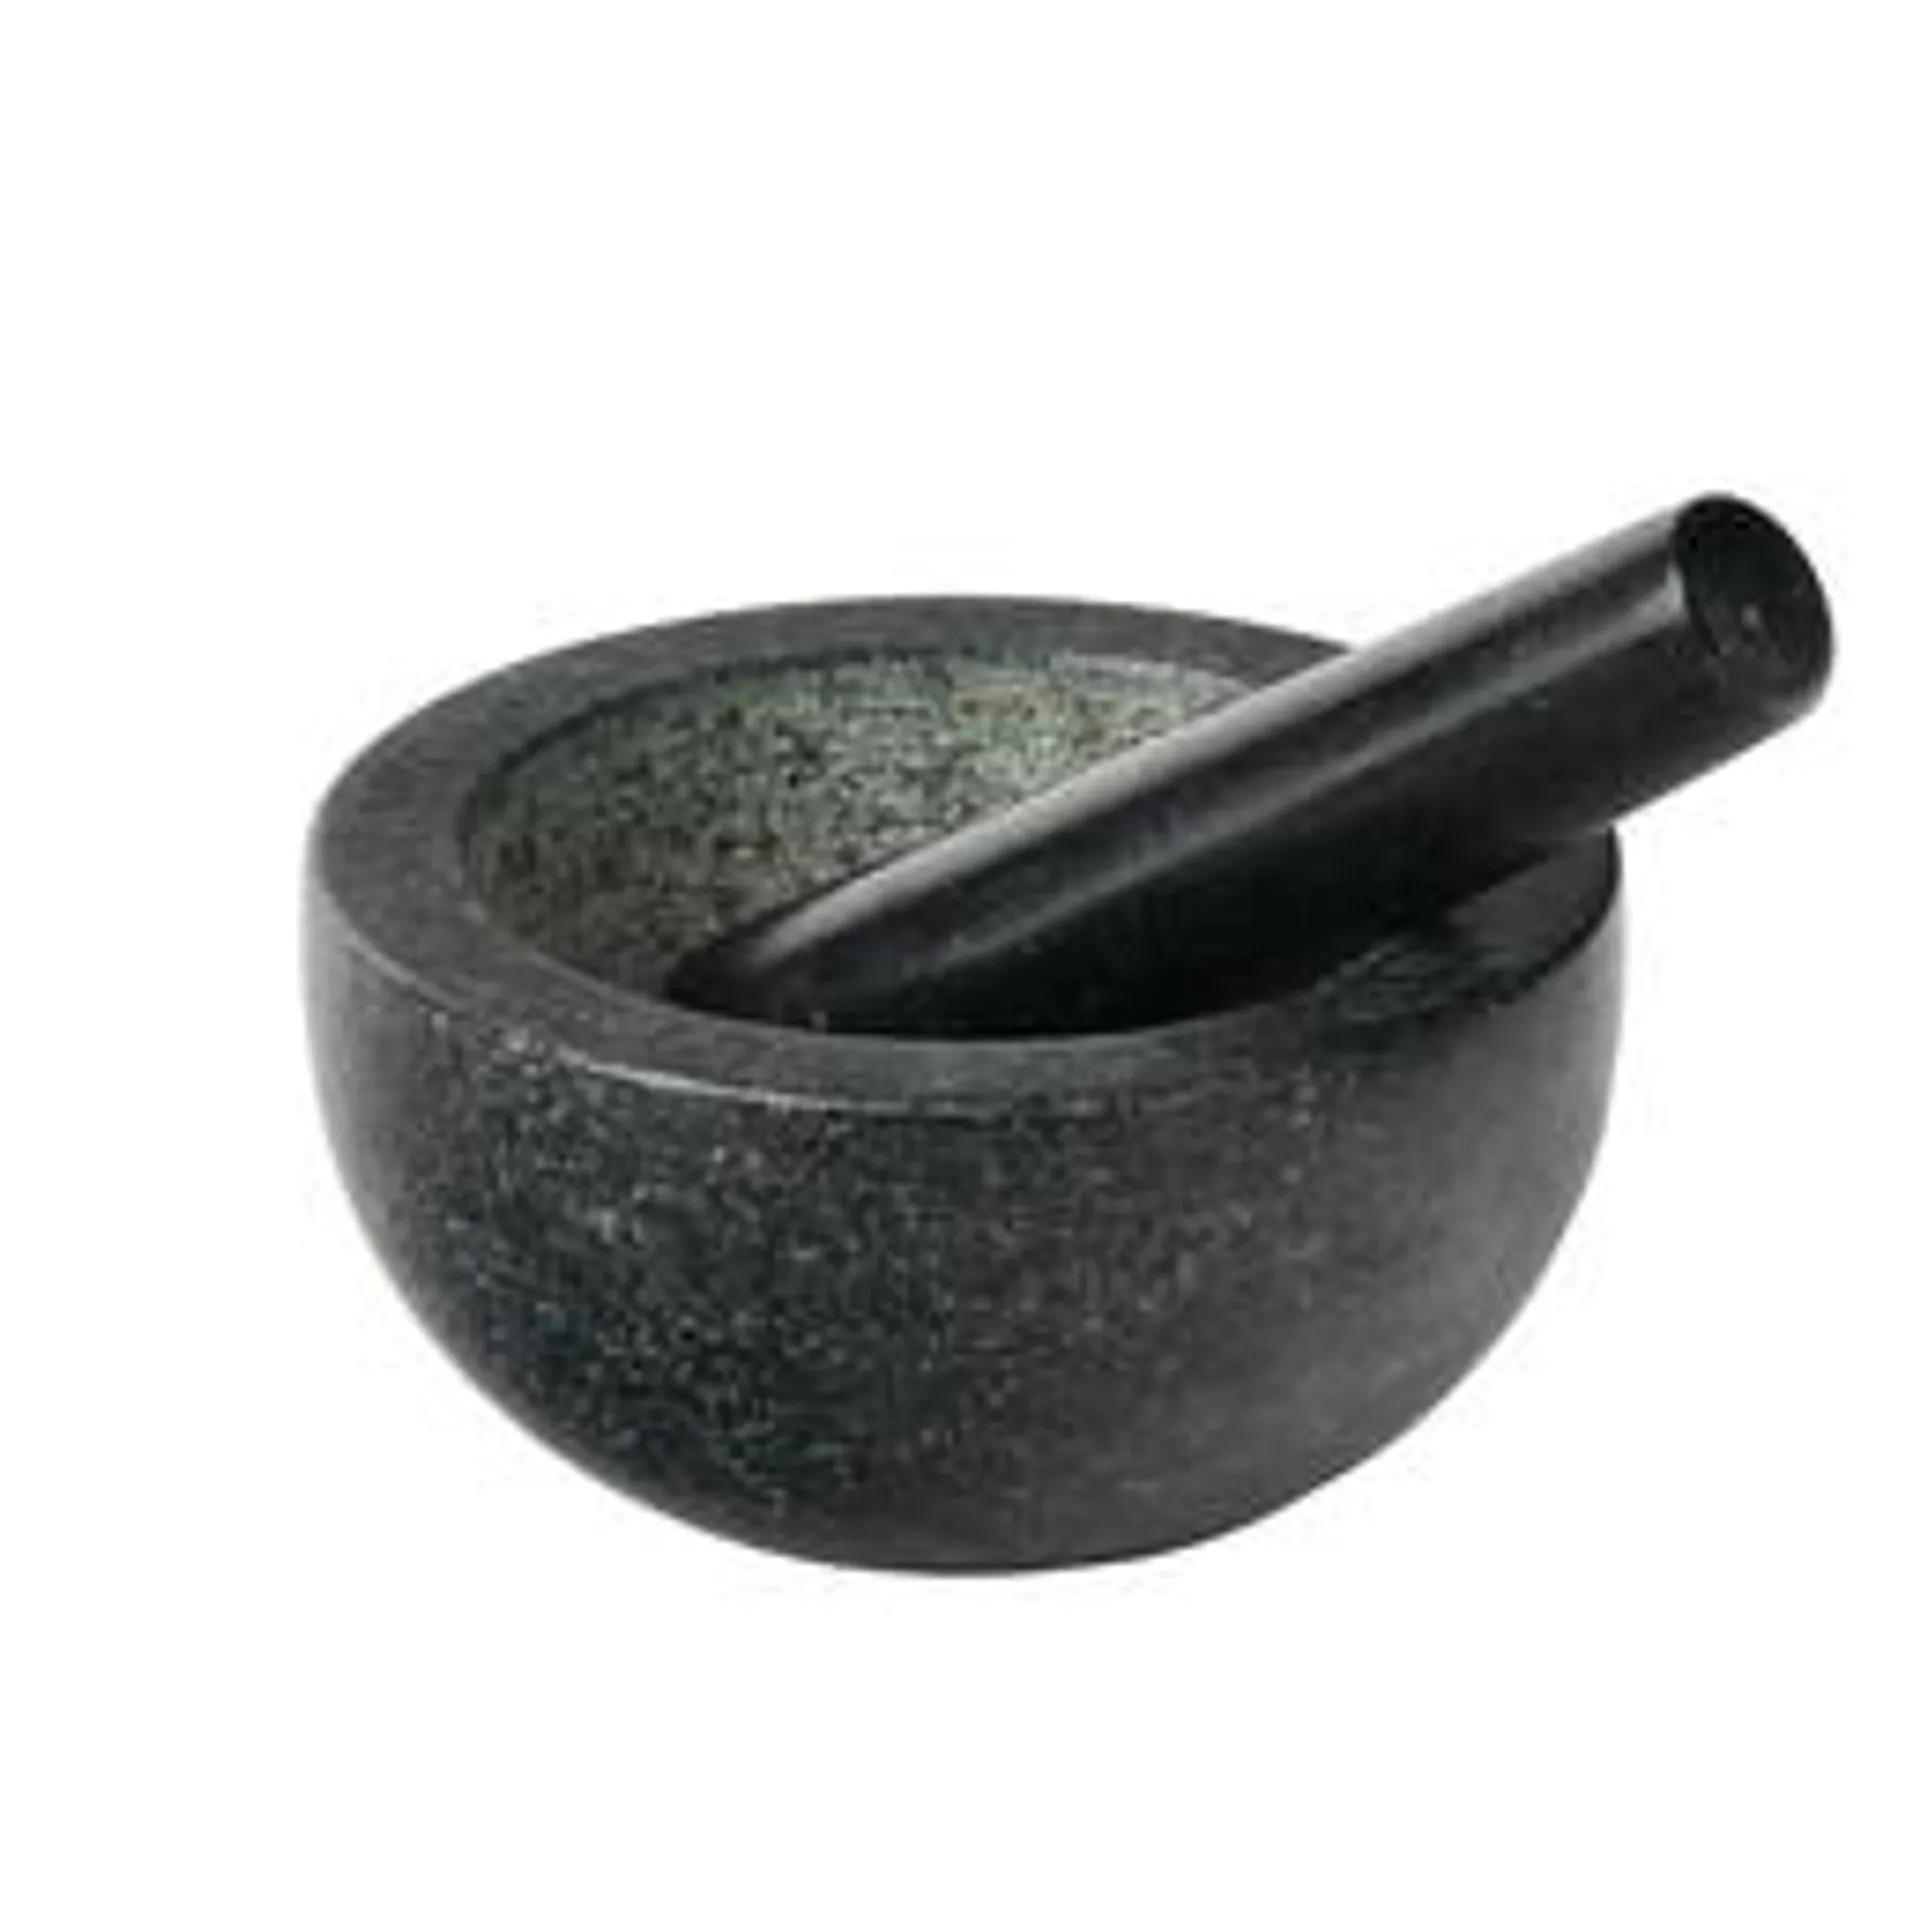 Capital Kitchen Mortar and Pestle, 16x8cm